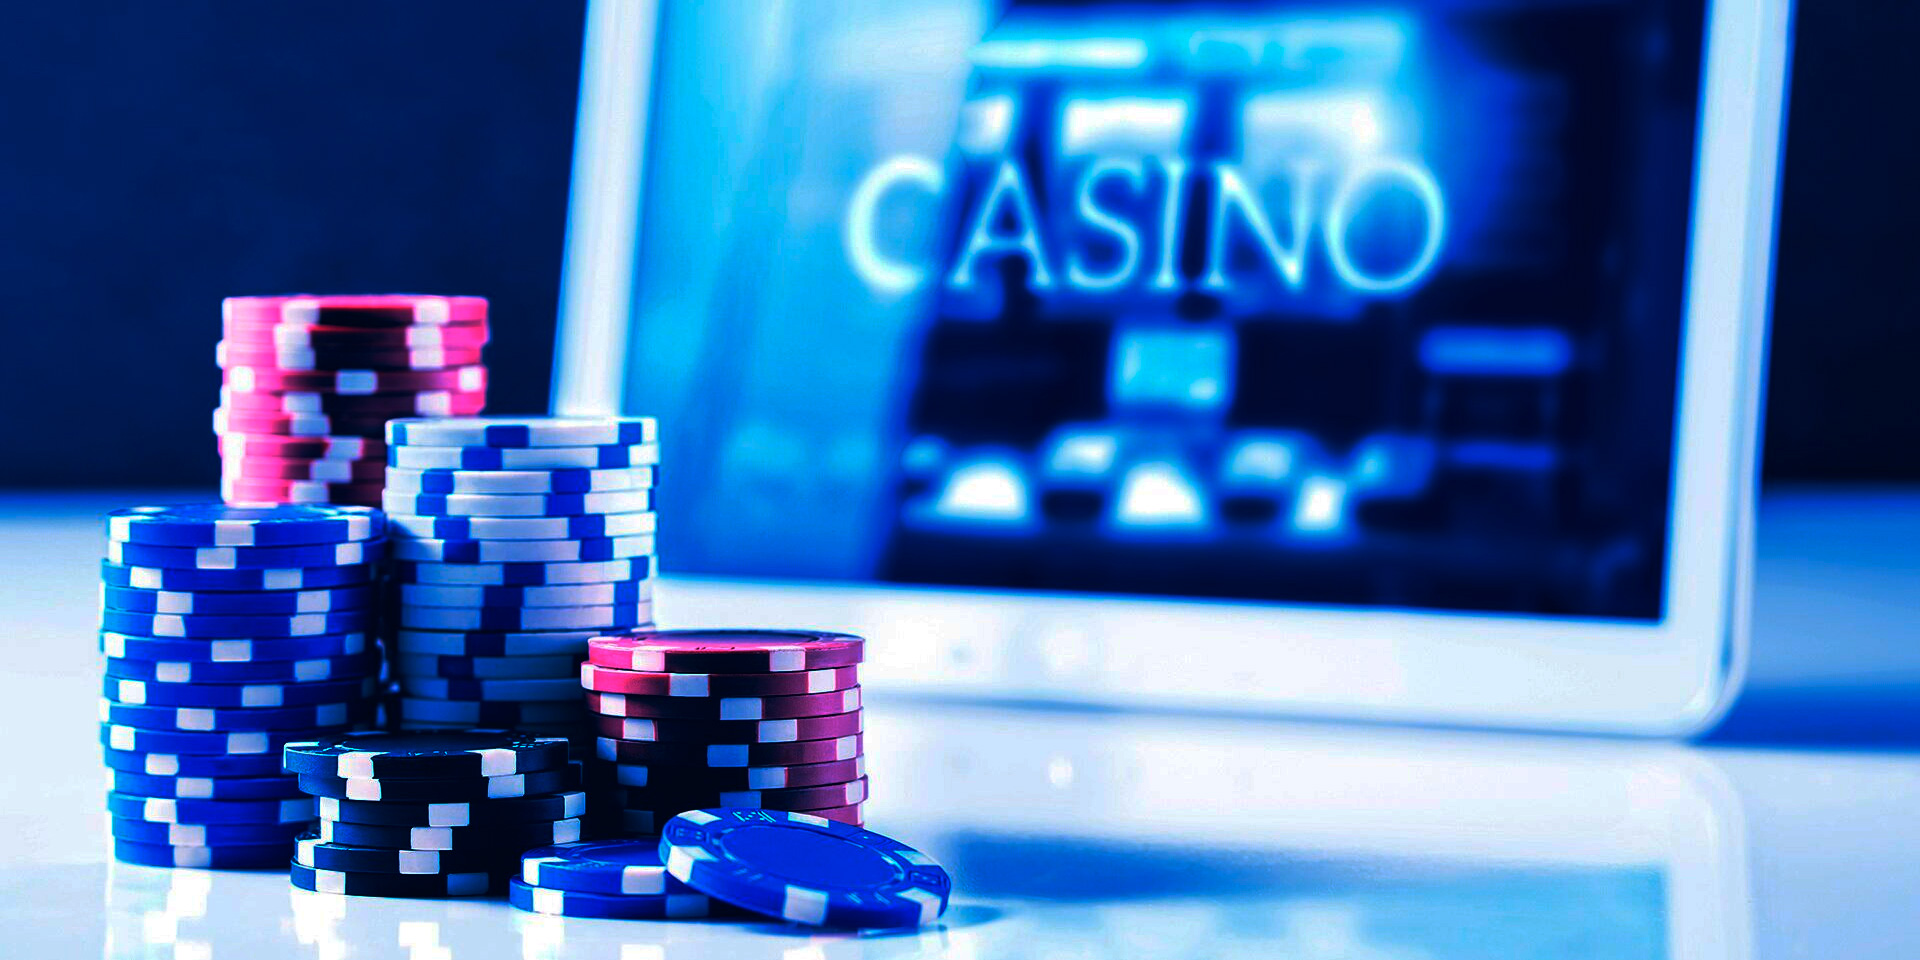 Bank Transfers for Online Casino